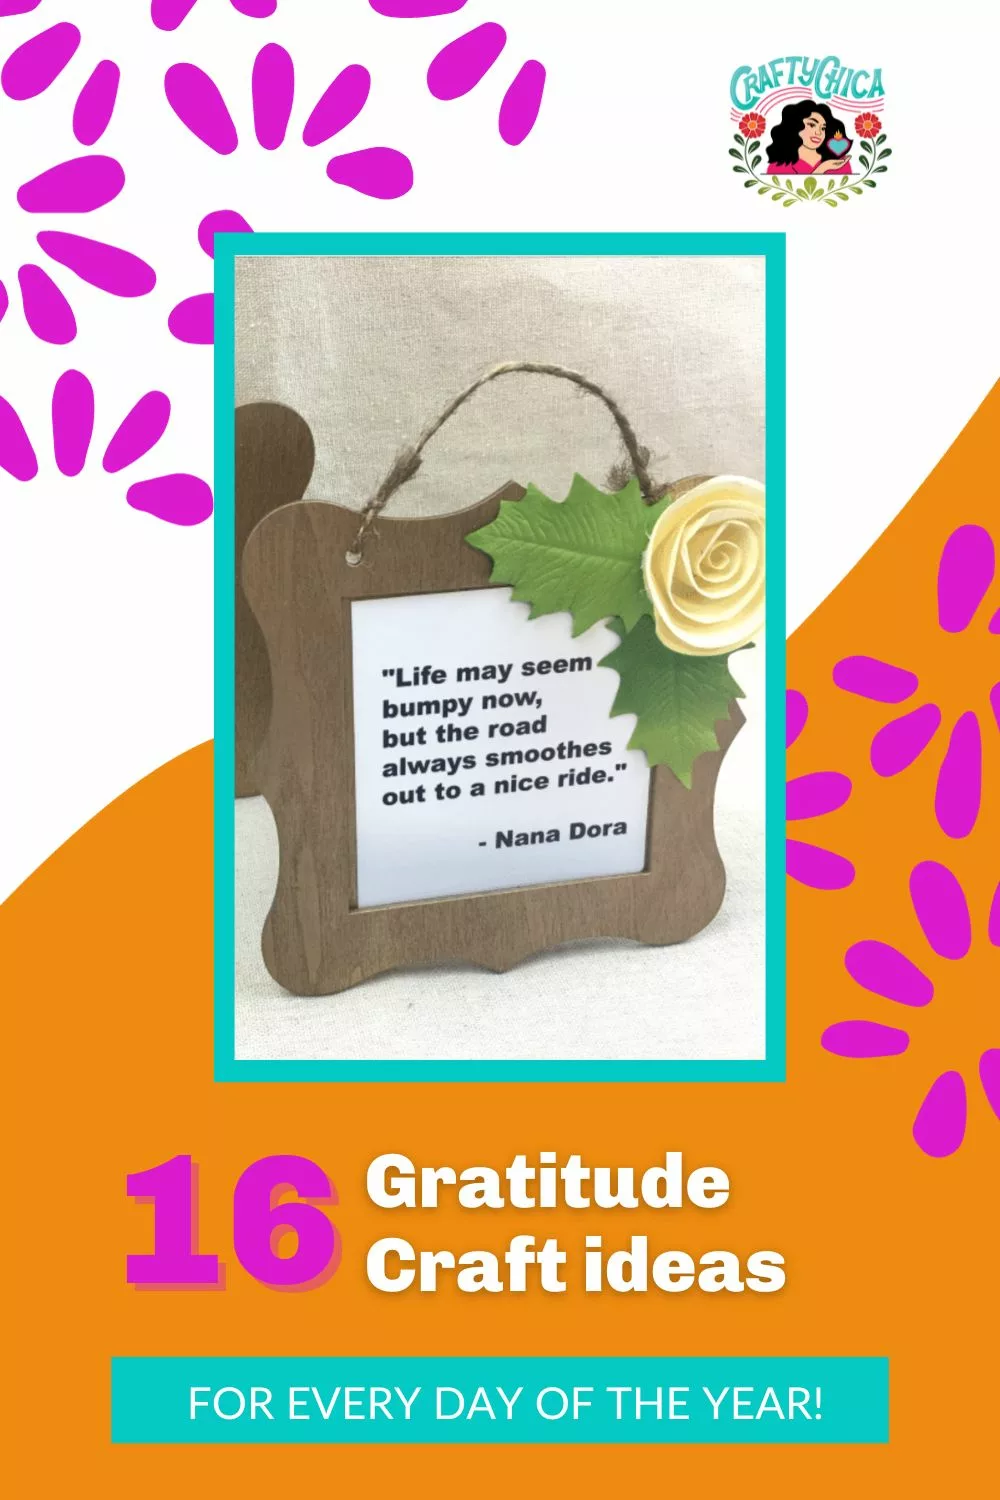 12 Gratitude craft ideas for Thanksgiving or everyday life